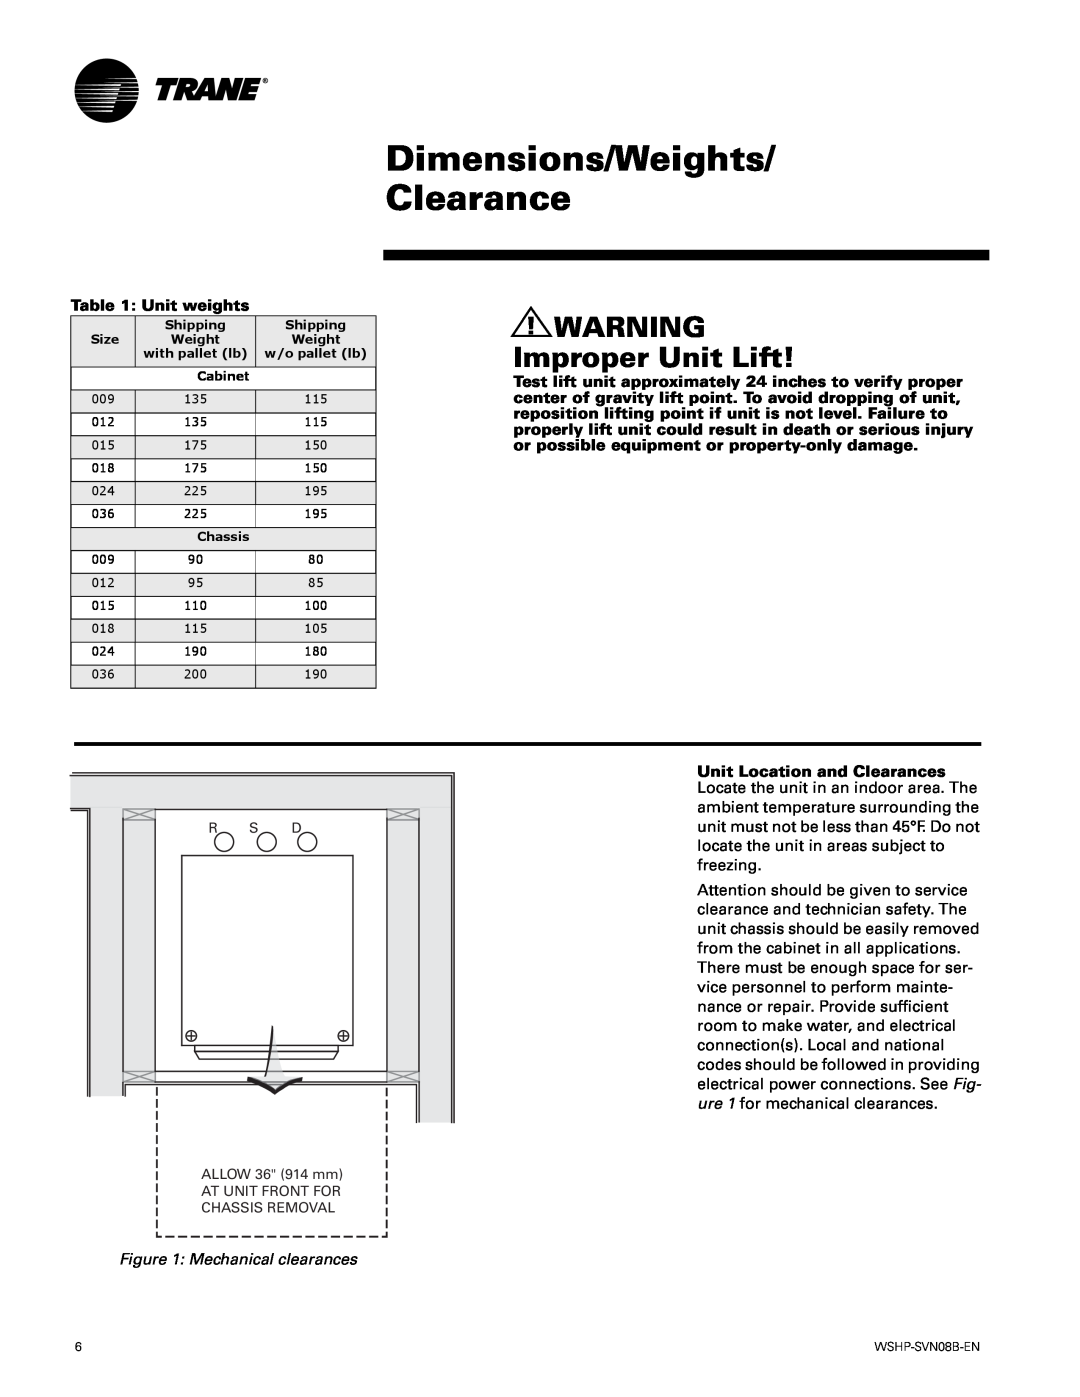 Trane GETB manual Dimensions/Weights/ Clearance, WARNING Improper Unit Lift, Unit weights, Mechanical clearances 